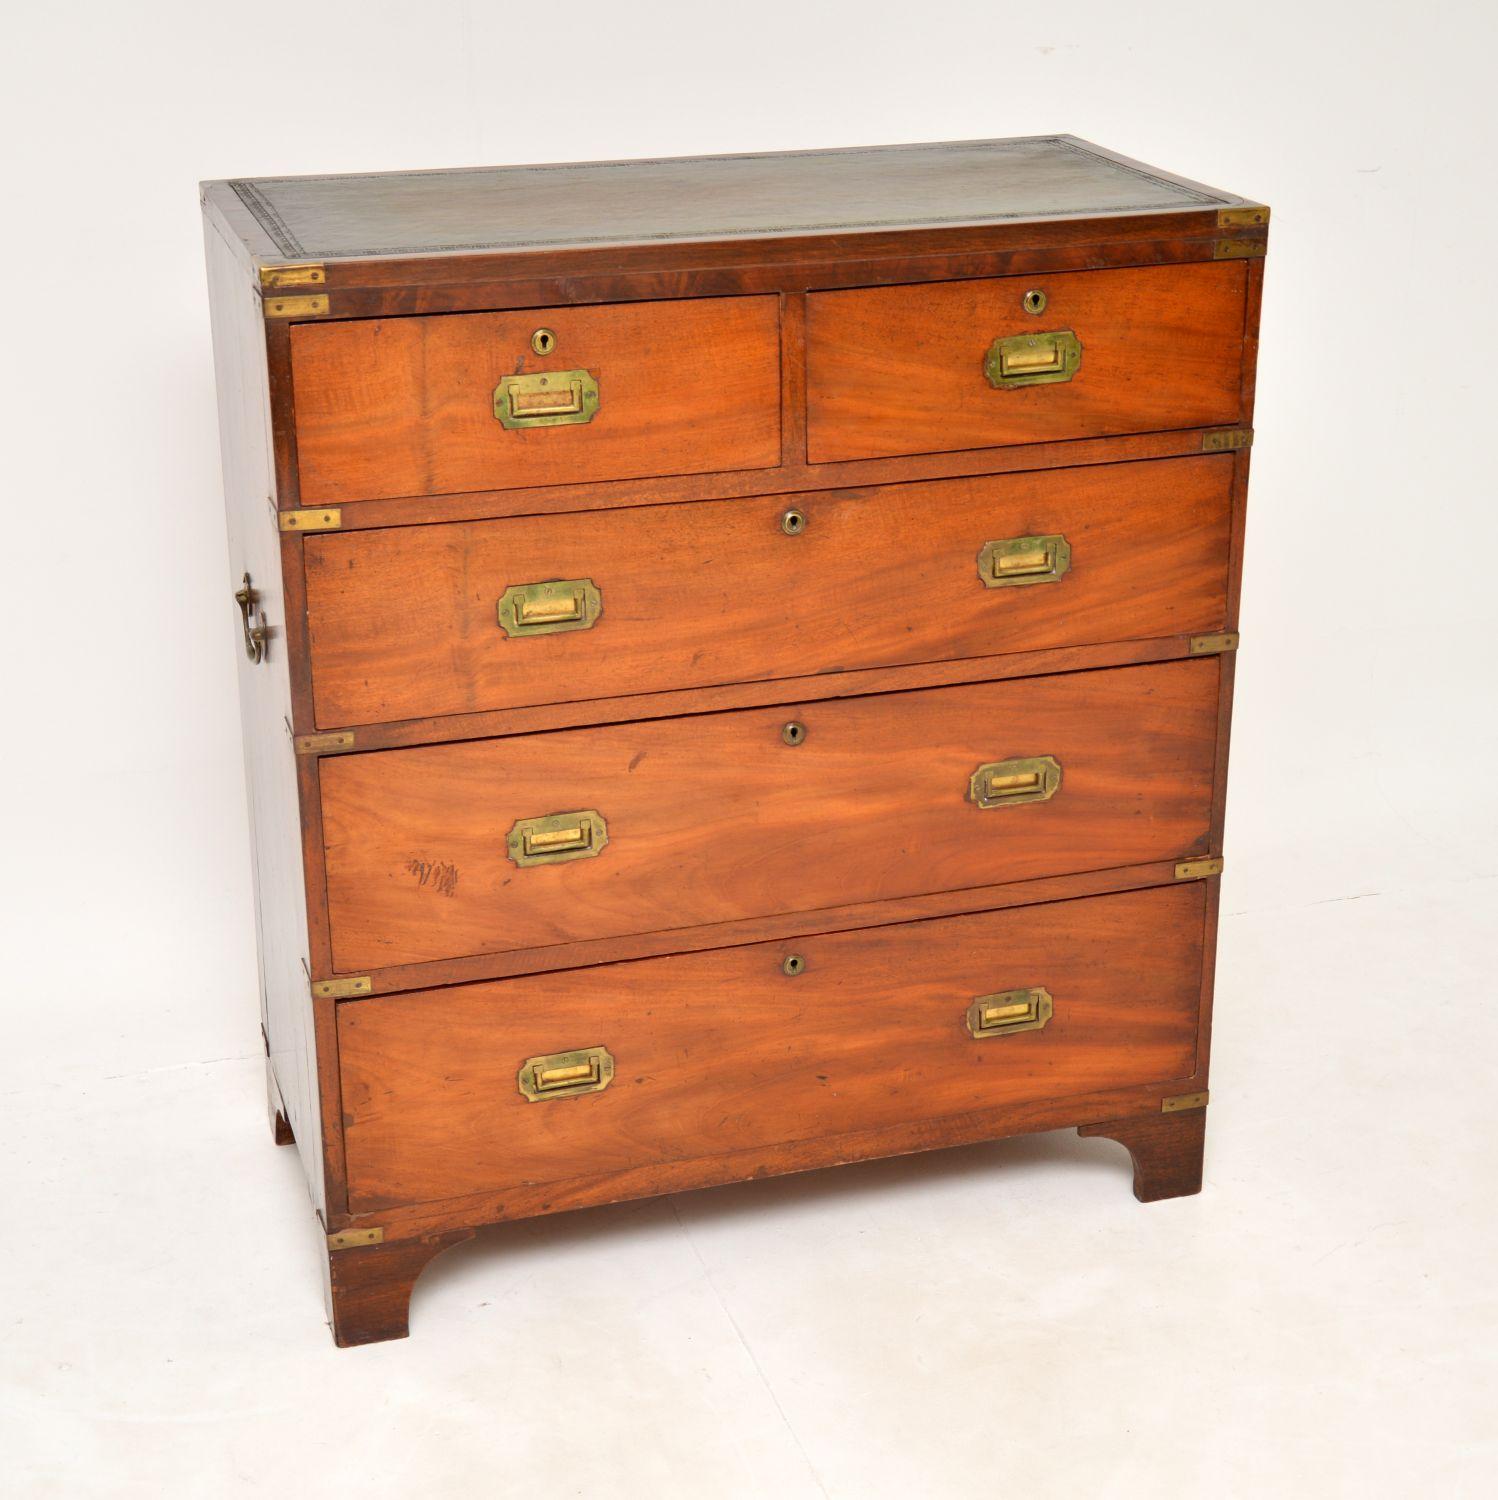 An excellent 19th century antique military campaign chest. This was made in England, it dates from around the 1860-1880 period.

This is very well made with lots of storage space, it has a fairly heavy patina with plenty of charm. There is an